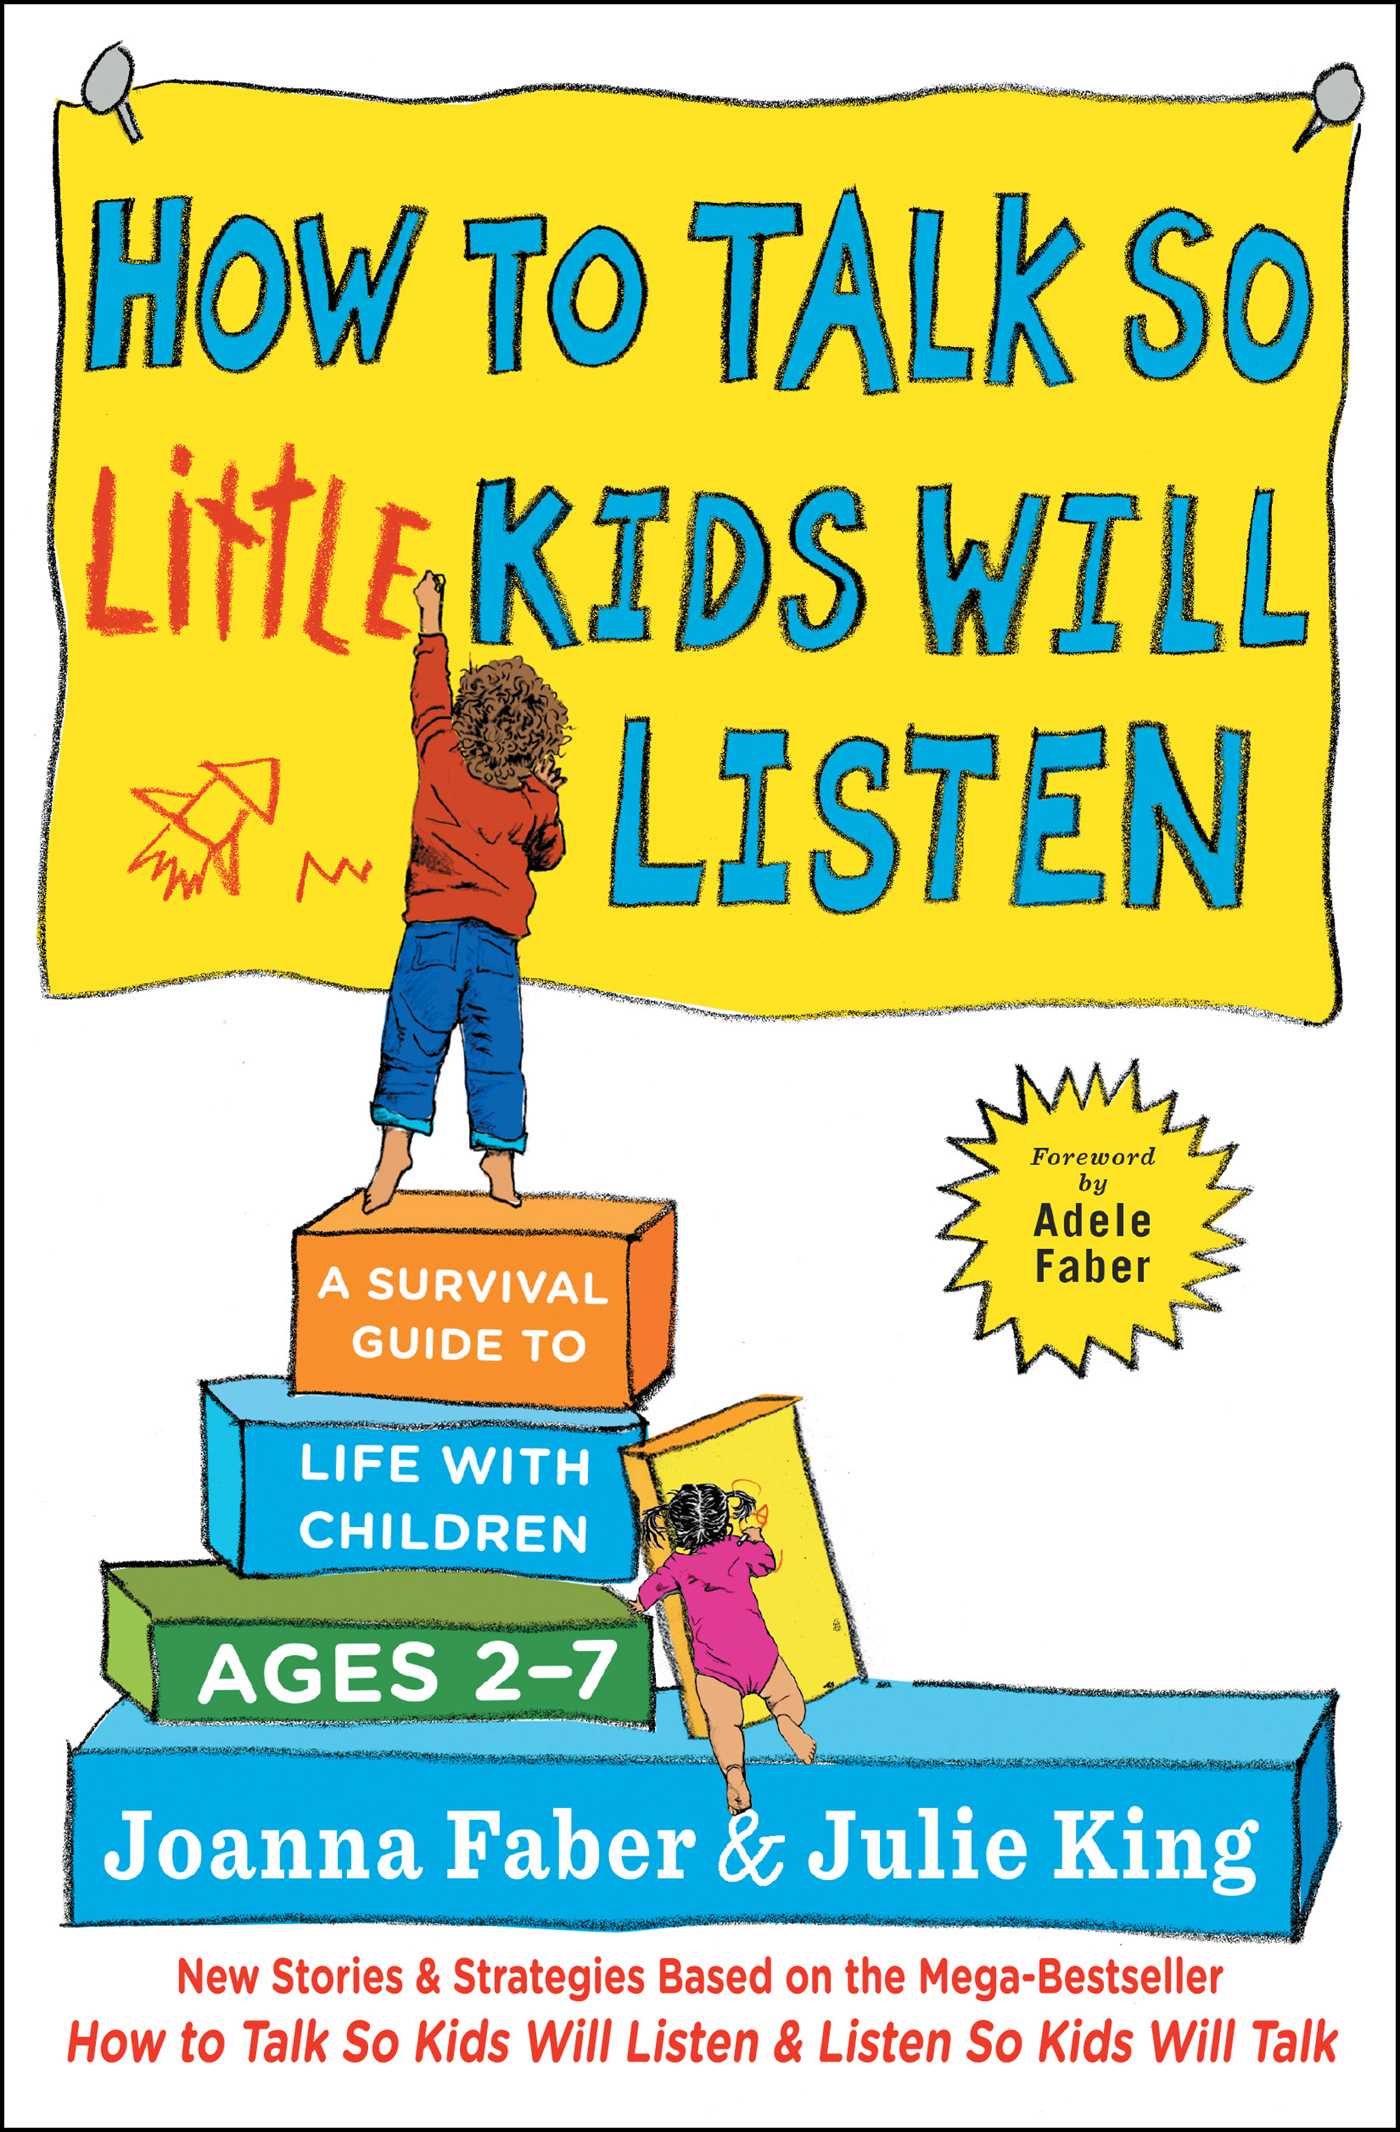 How to Talk so Little Kids Will Listen A Survival Guide to Life with Children Ages 2-7 cover image